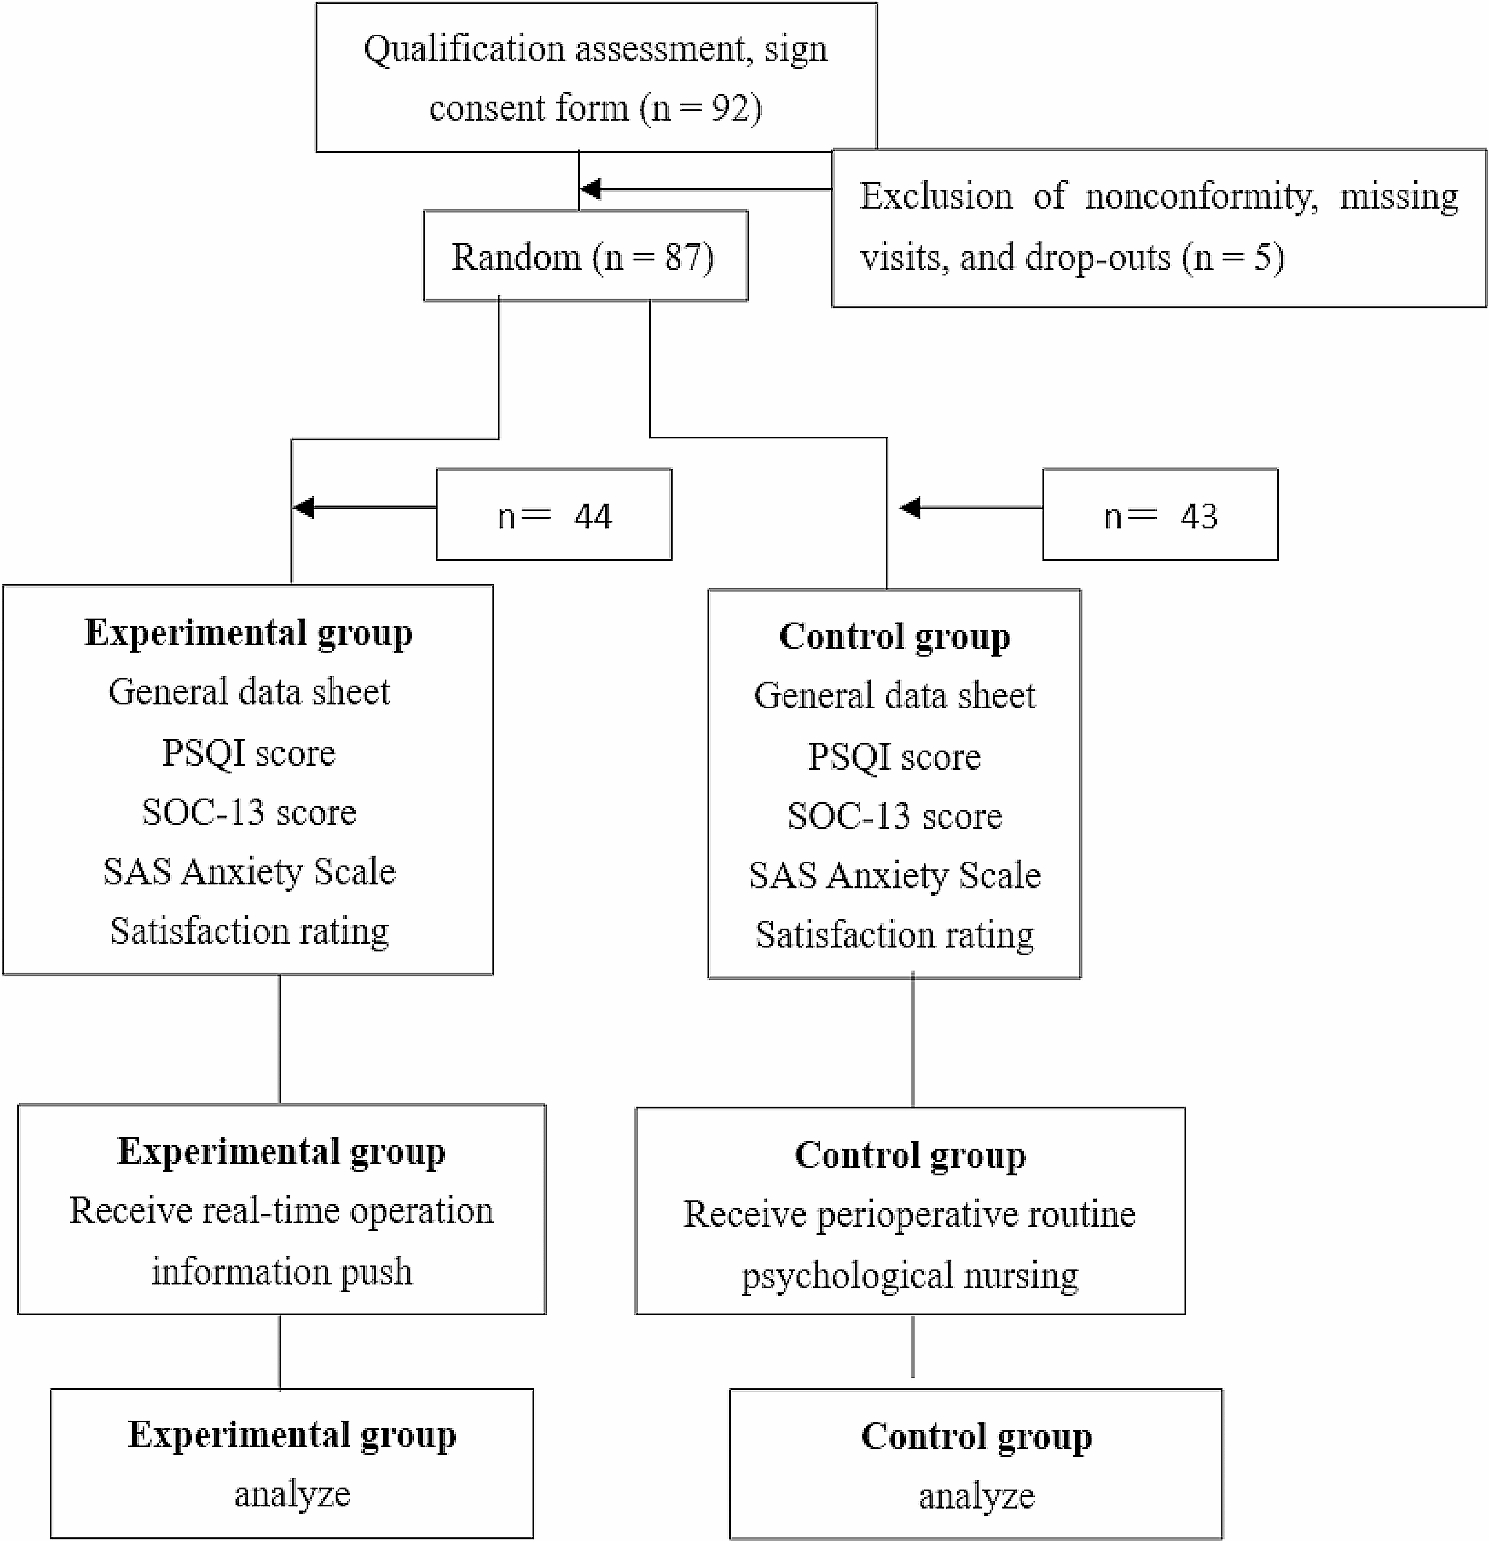 Real-time procedure information sharing as a means to reduce perioperative anxiety in families of children undergoing elective surgery - a randomized controlled study